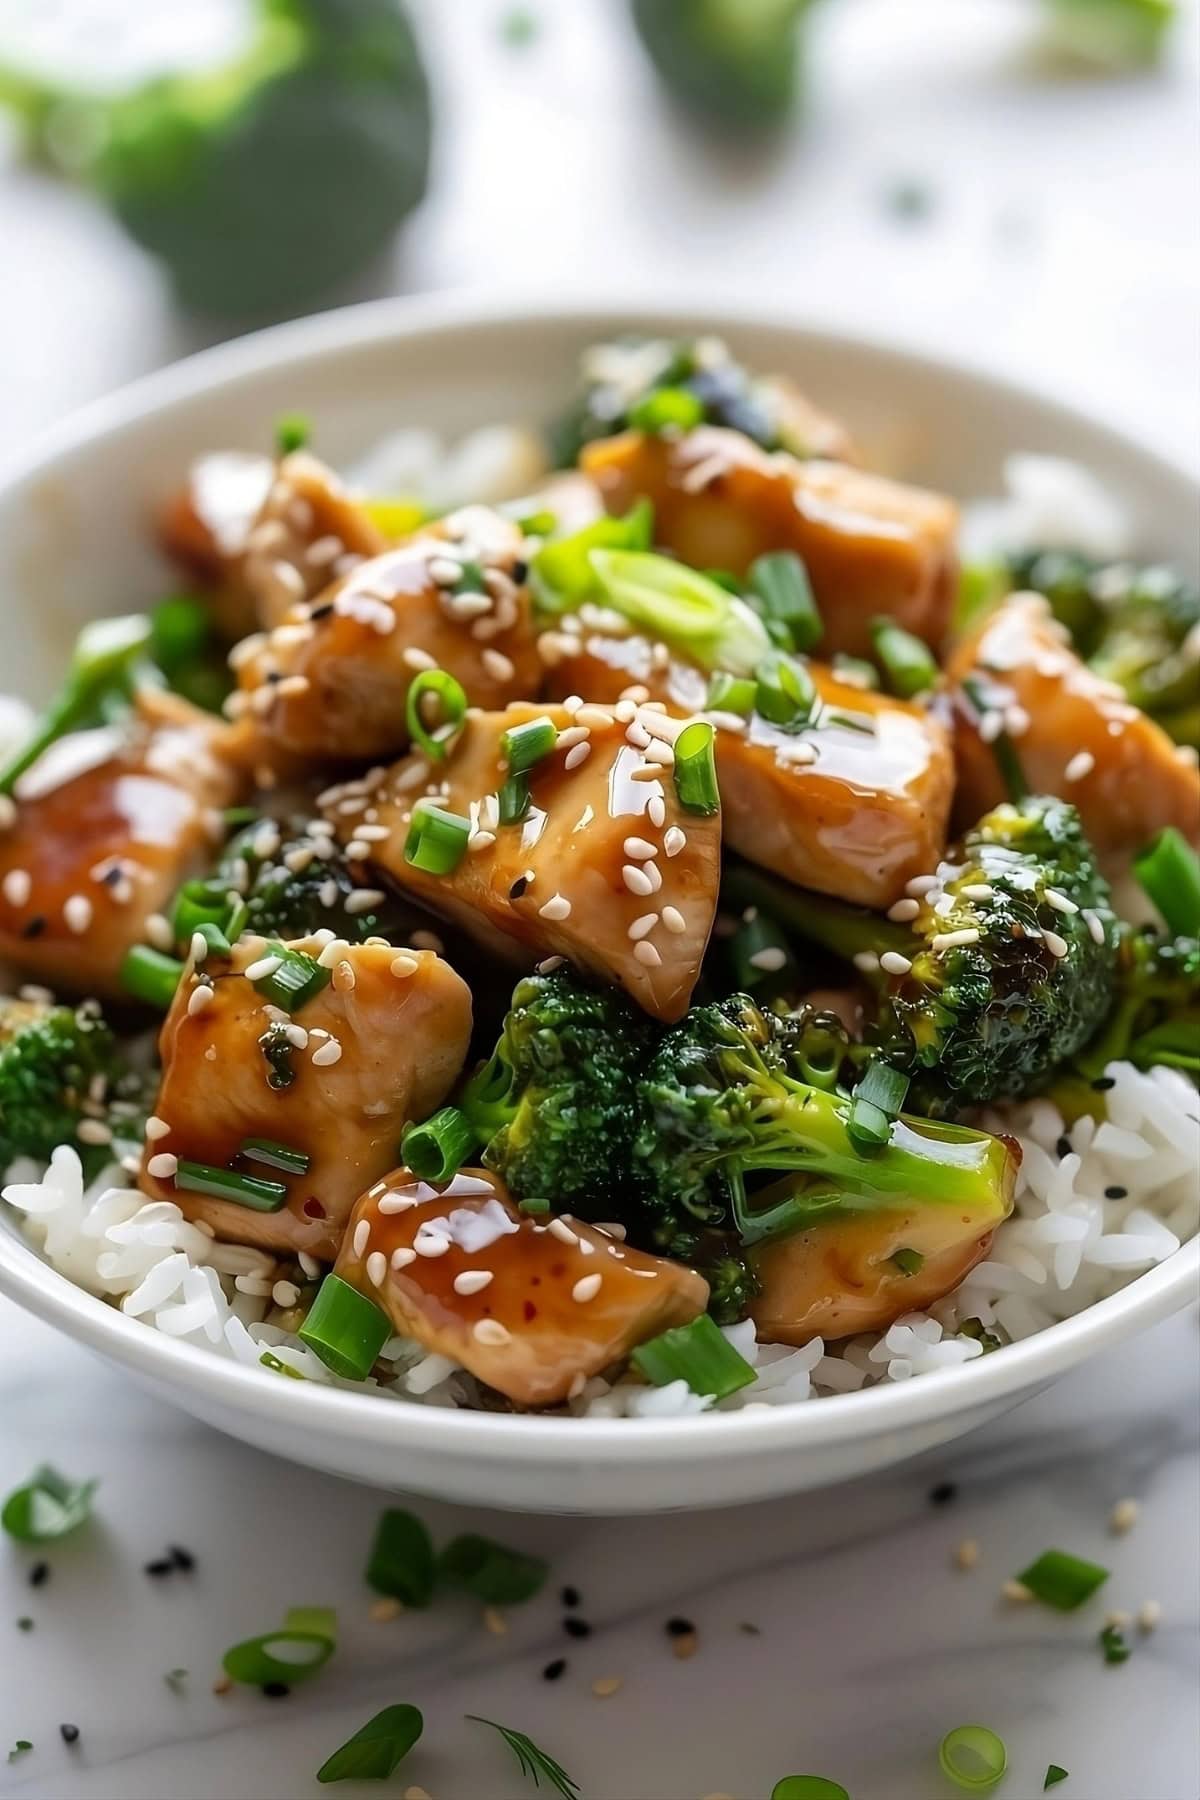 Bowl of saucy stir fried chicken and broccoli on top of white rice, garnished with spring onion and sesame seeds.
